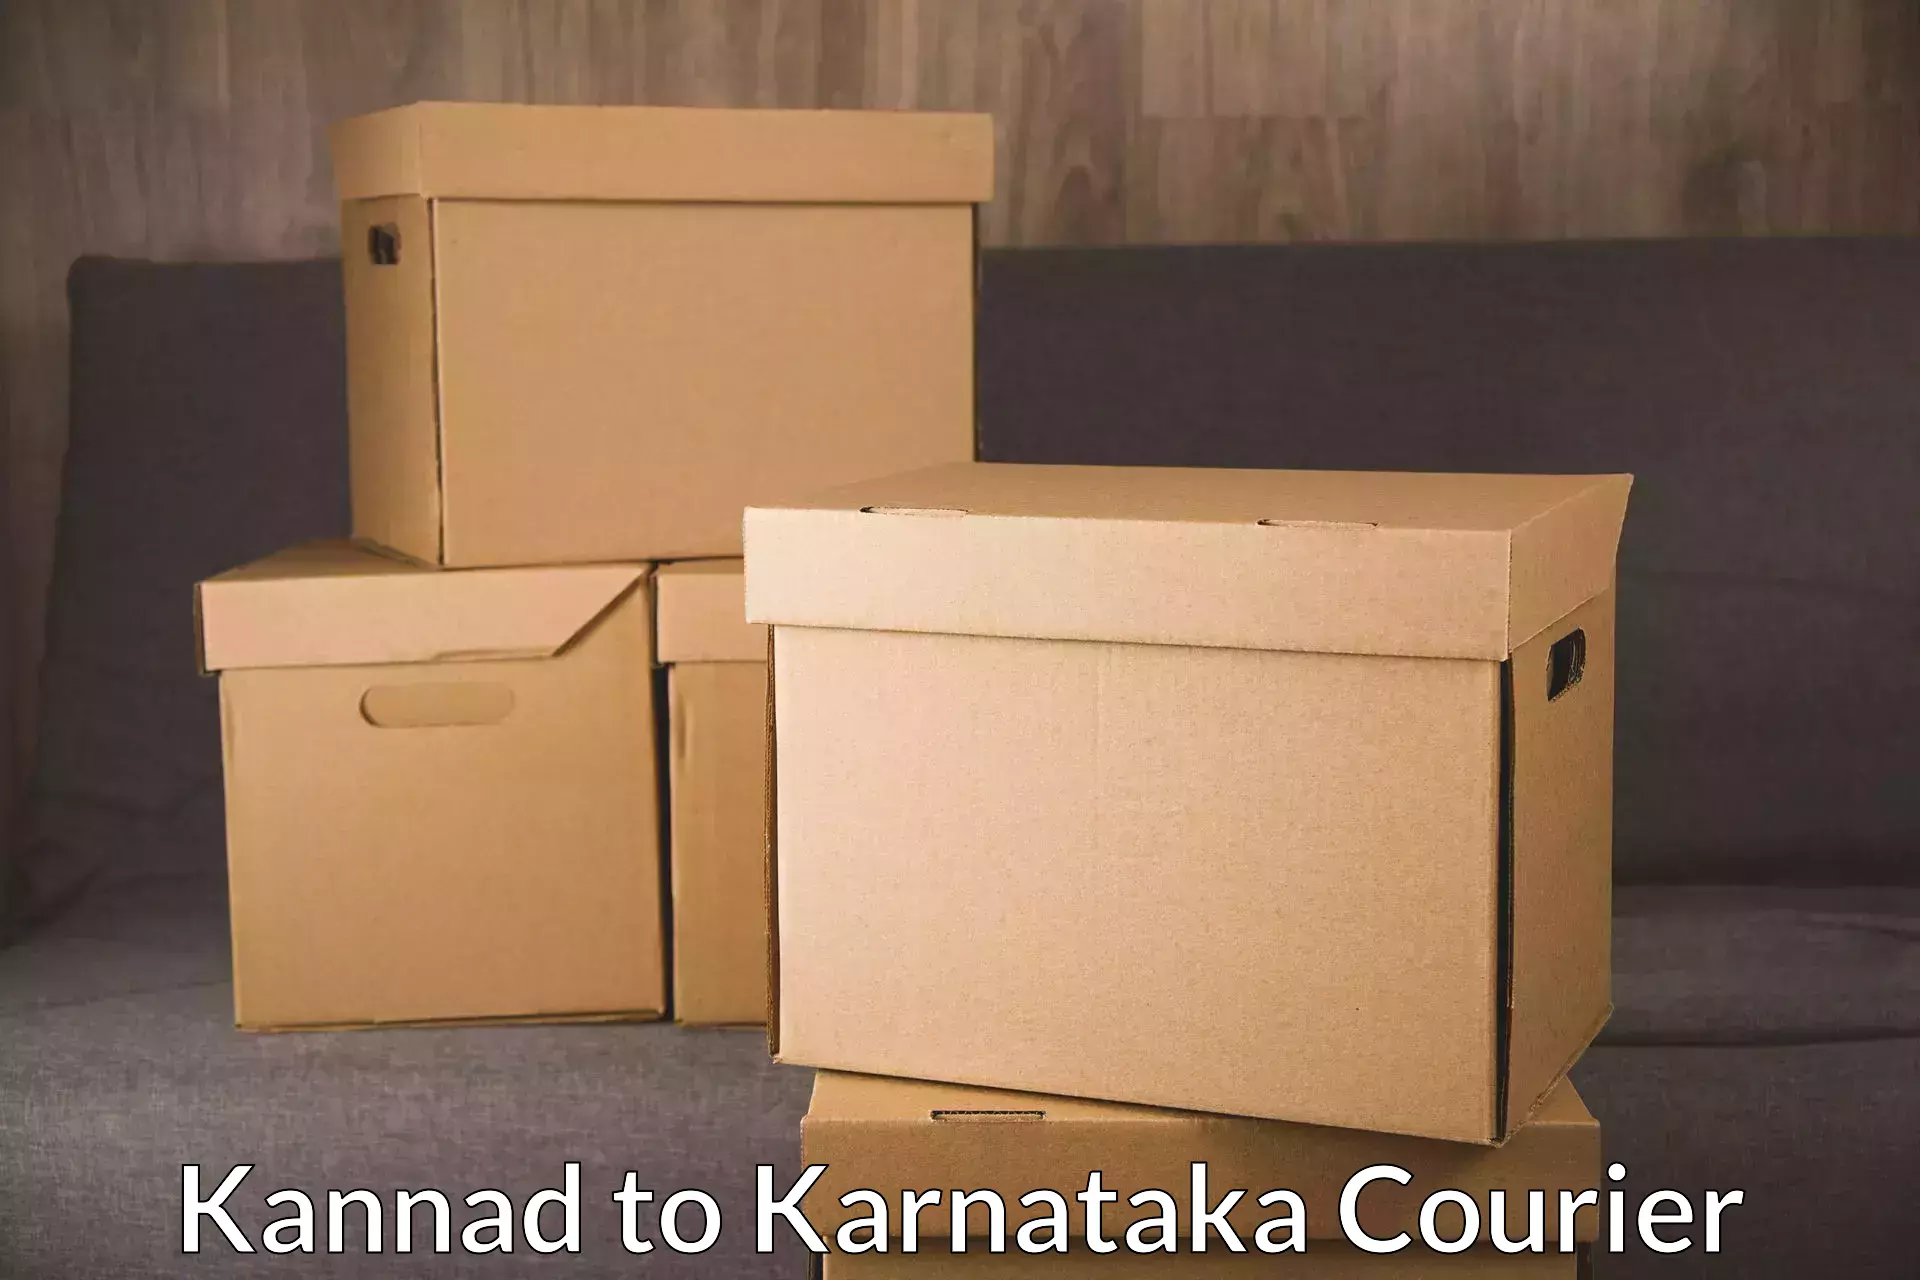 Round-the-clock parcel delivery Kannad to Yellapur